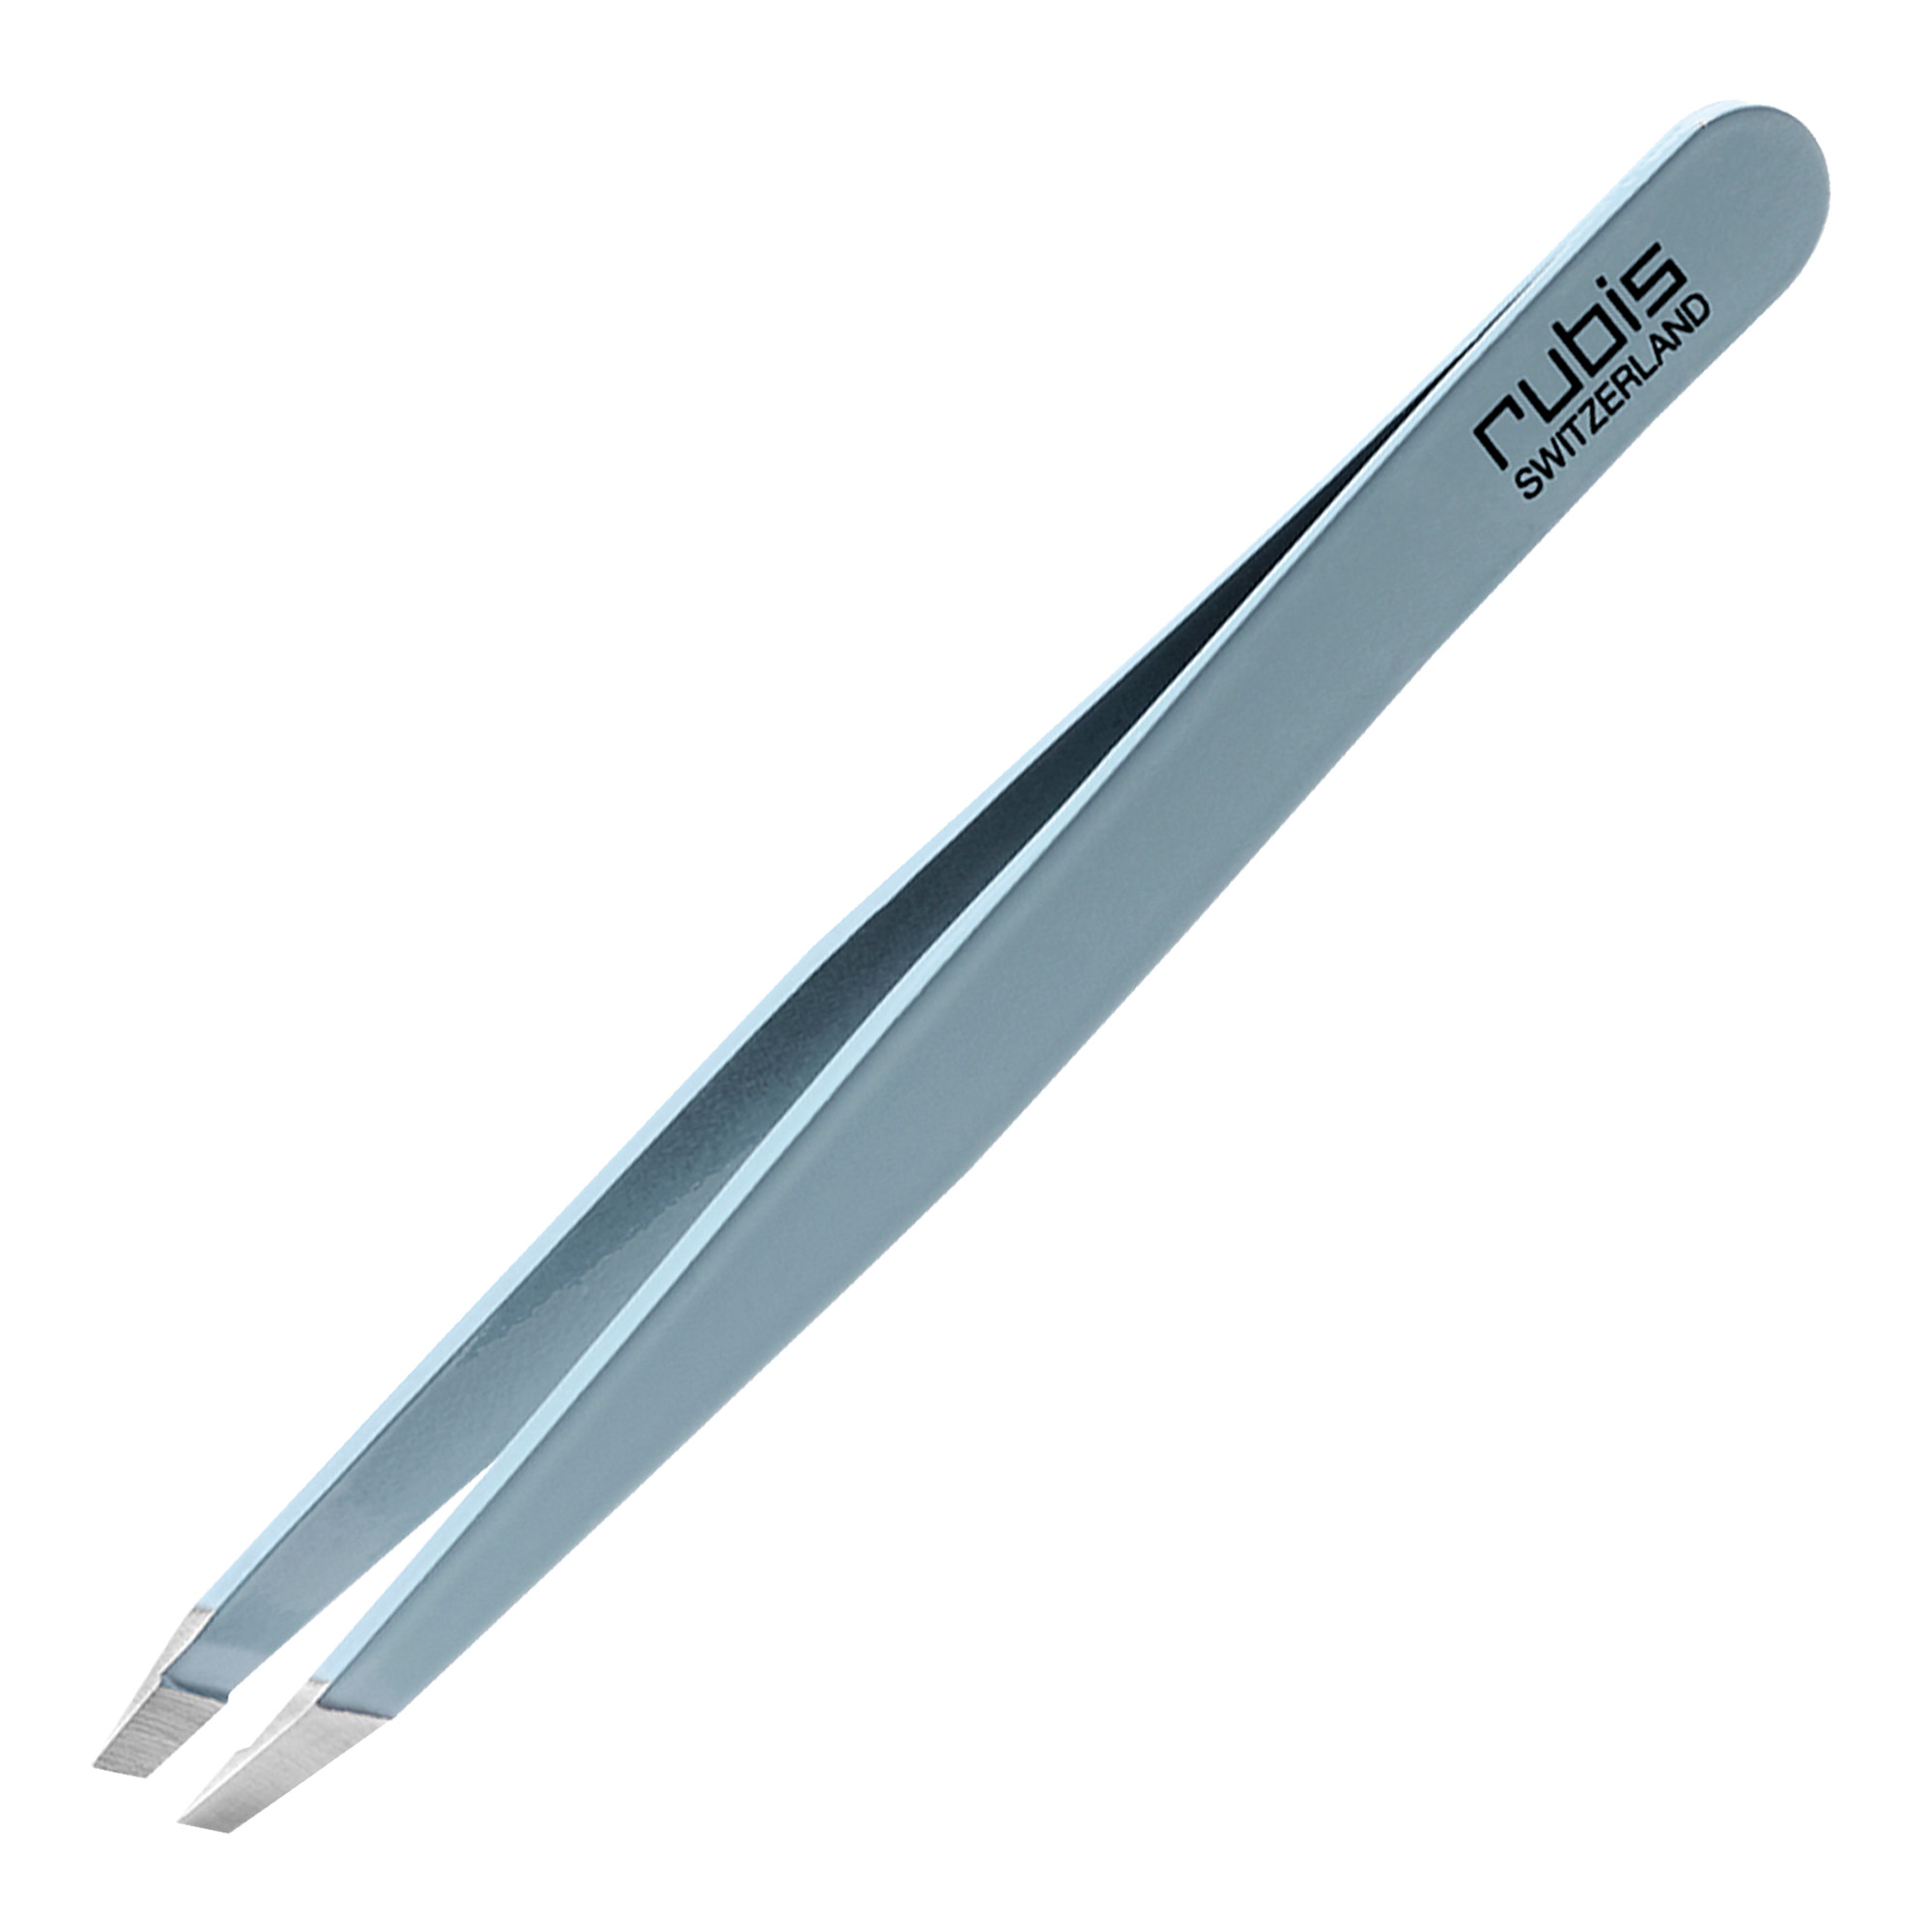 Rubis stainless steel tweezers with slant tip light blue